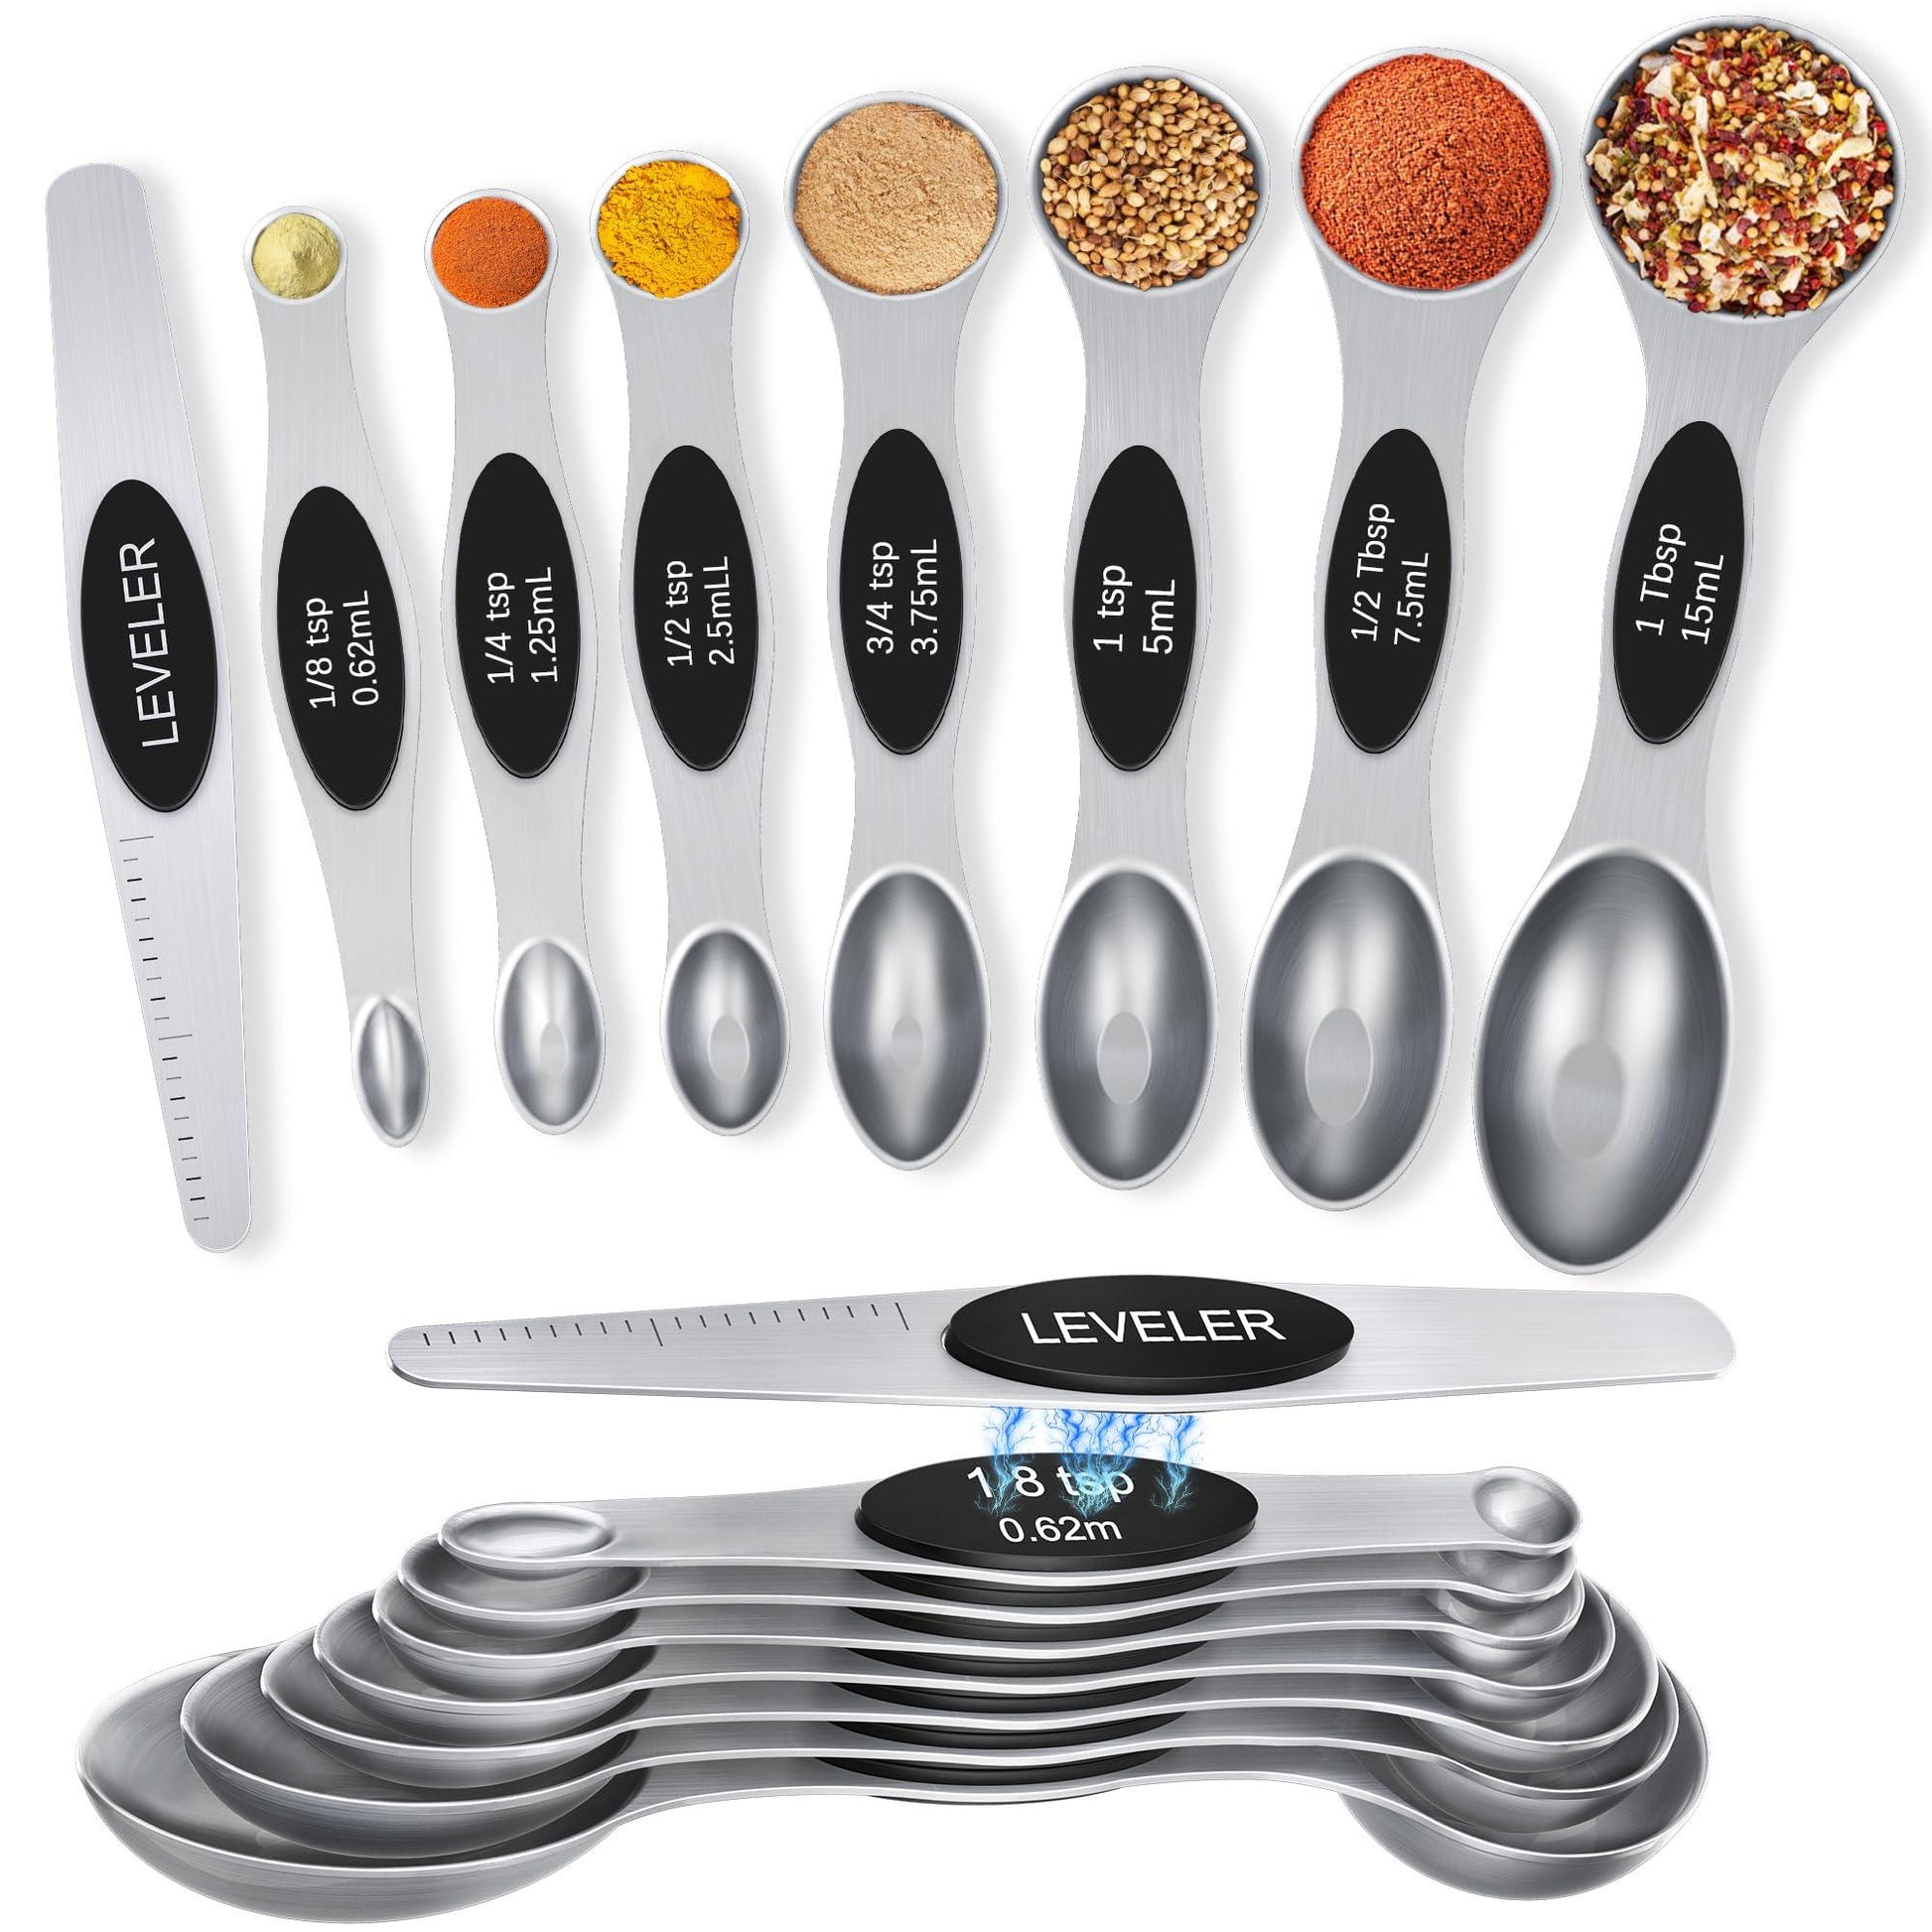 Measuring Spoons Set of 8 - Magnetic Tablespoon Measure Spoon, 304 Stainless Steel Stackable Double-Sided Nested Teaspoons and Tablespoons,Fits in Most Kitchen Spice Jar,Best Kitchen Gadget - CookCave